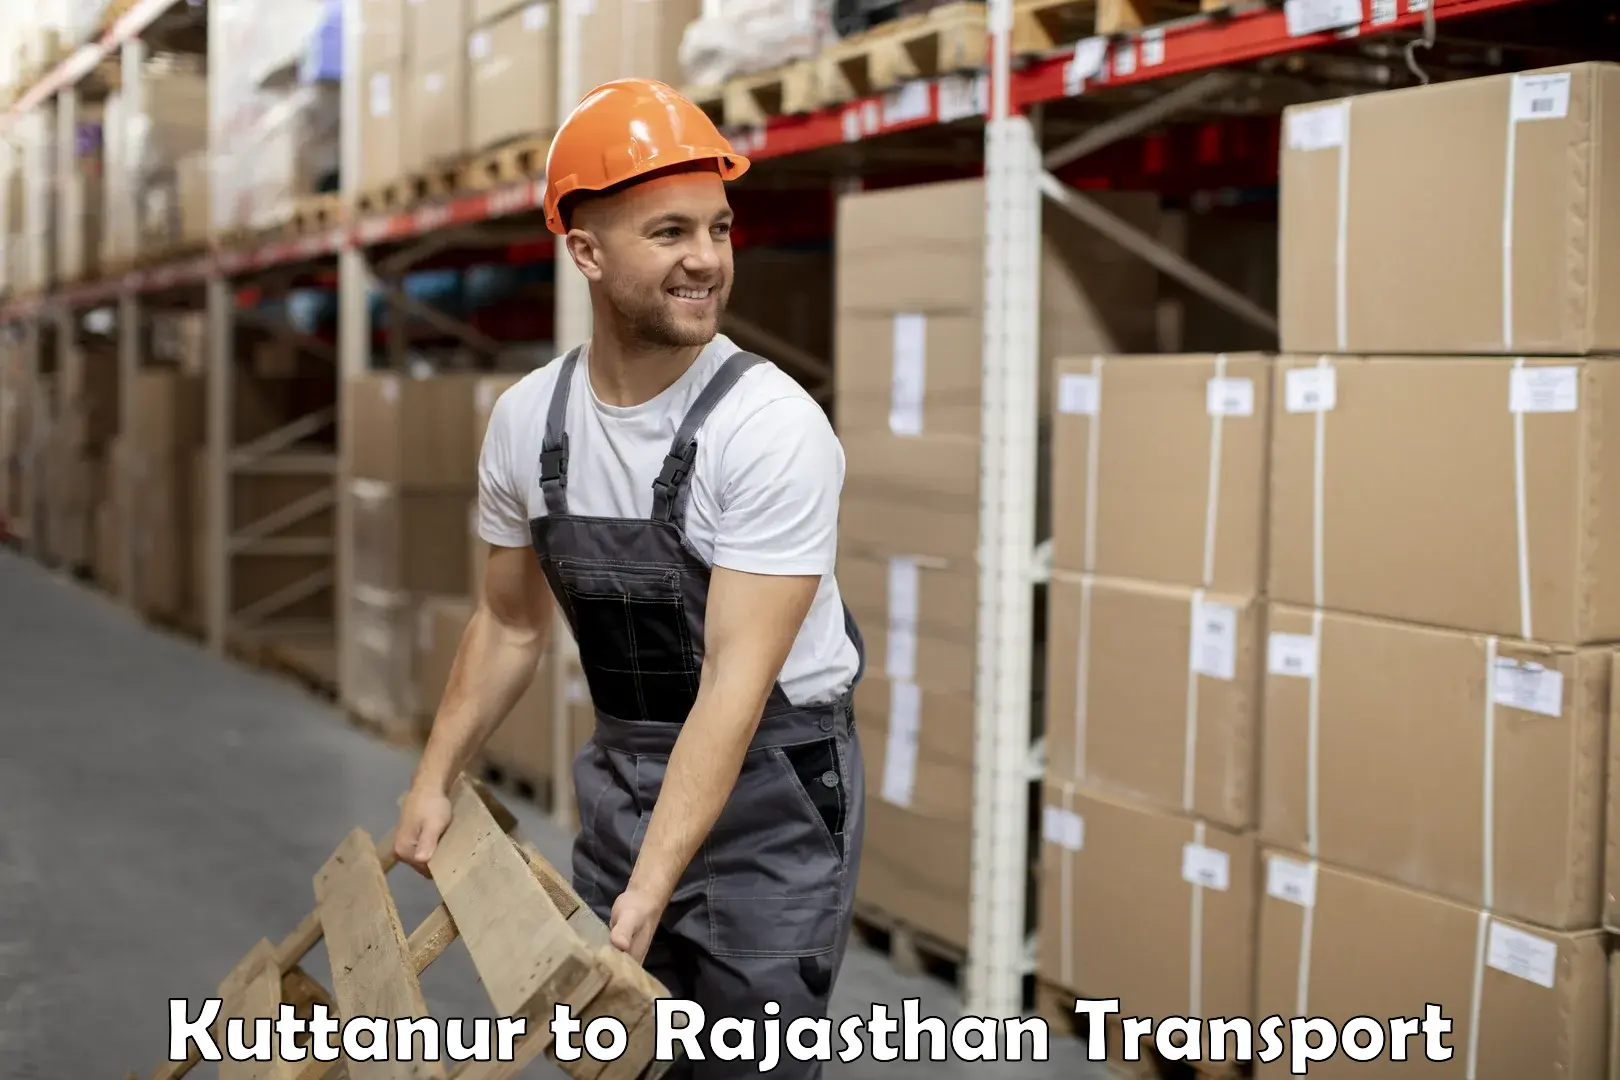 Delivery service Kuttanur to Rajasthan